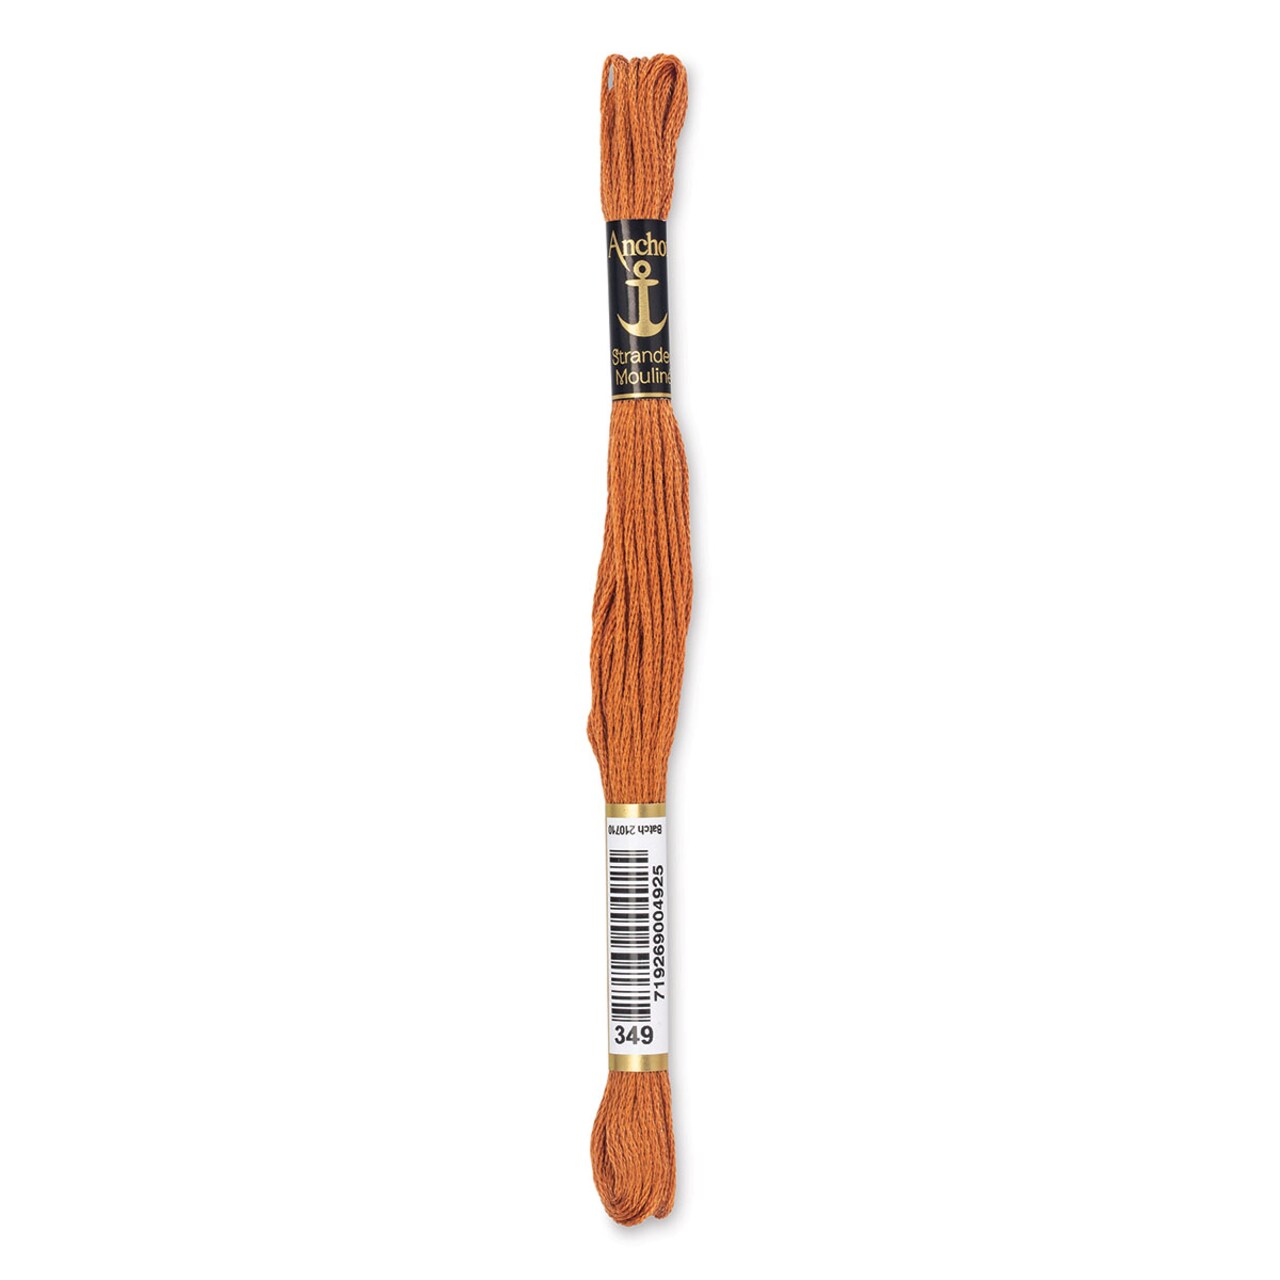 Lamme Mild Asien Anchor Embroidery Floss - Pkg of 12, Brown 0349 | Michaels